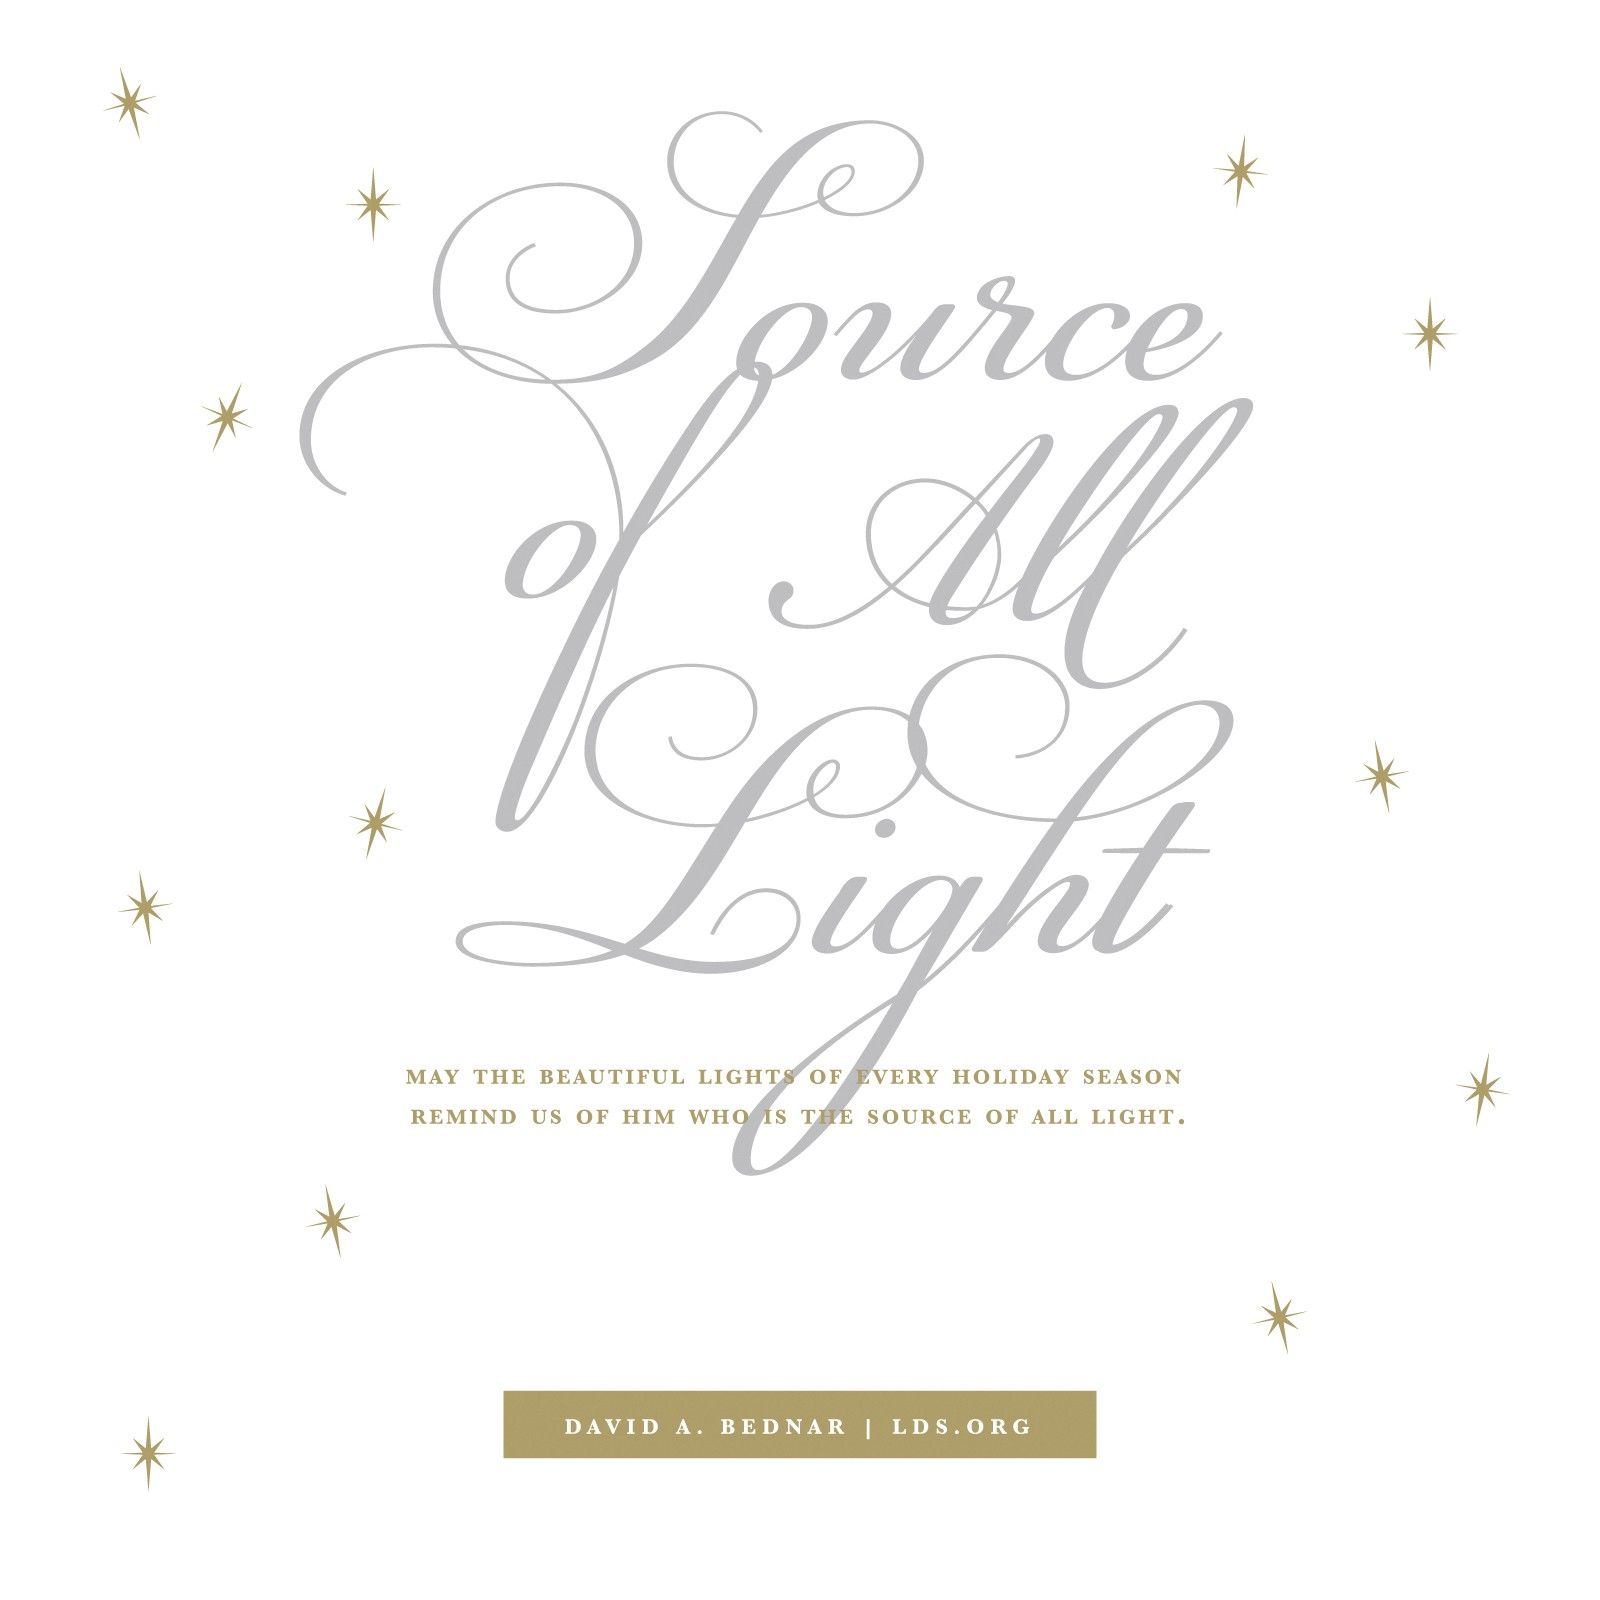 “May the beautiful lights of every holiday season remind us of Him who is the source of all light.”—Elder David A. Bednar, “The Light and the Life of the World”